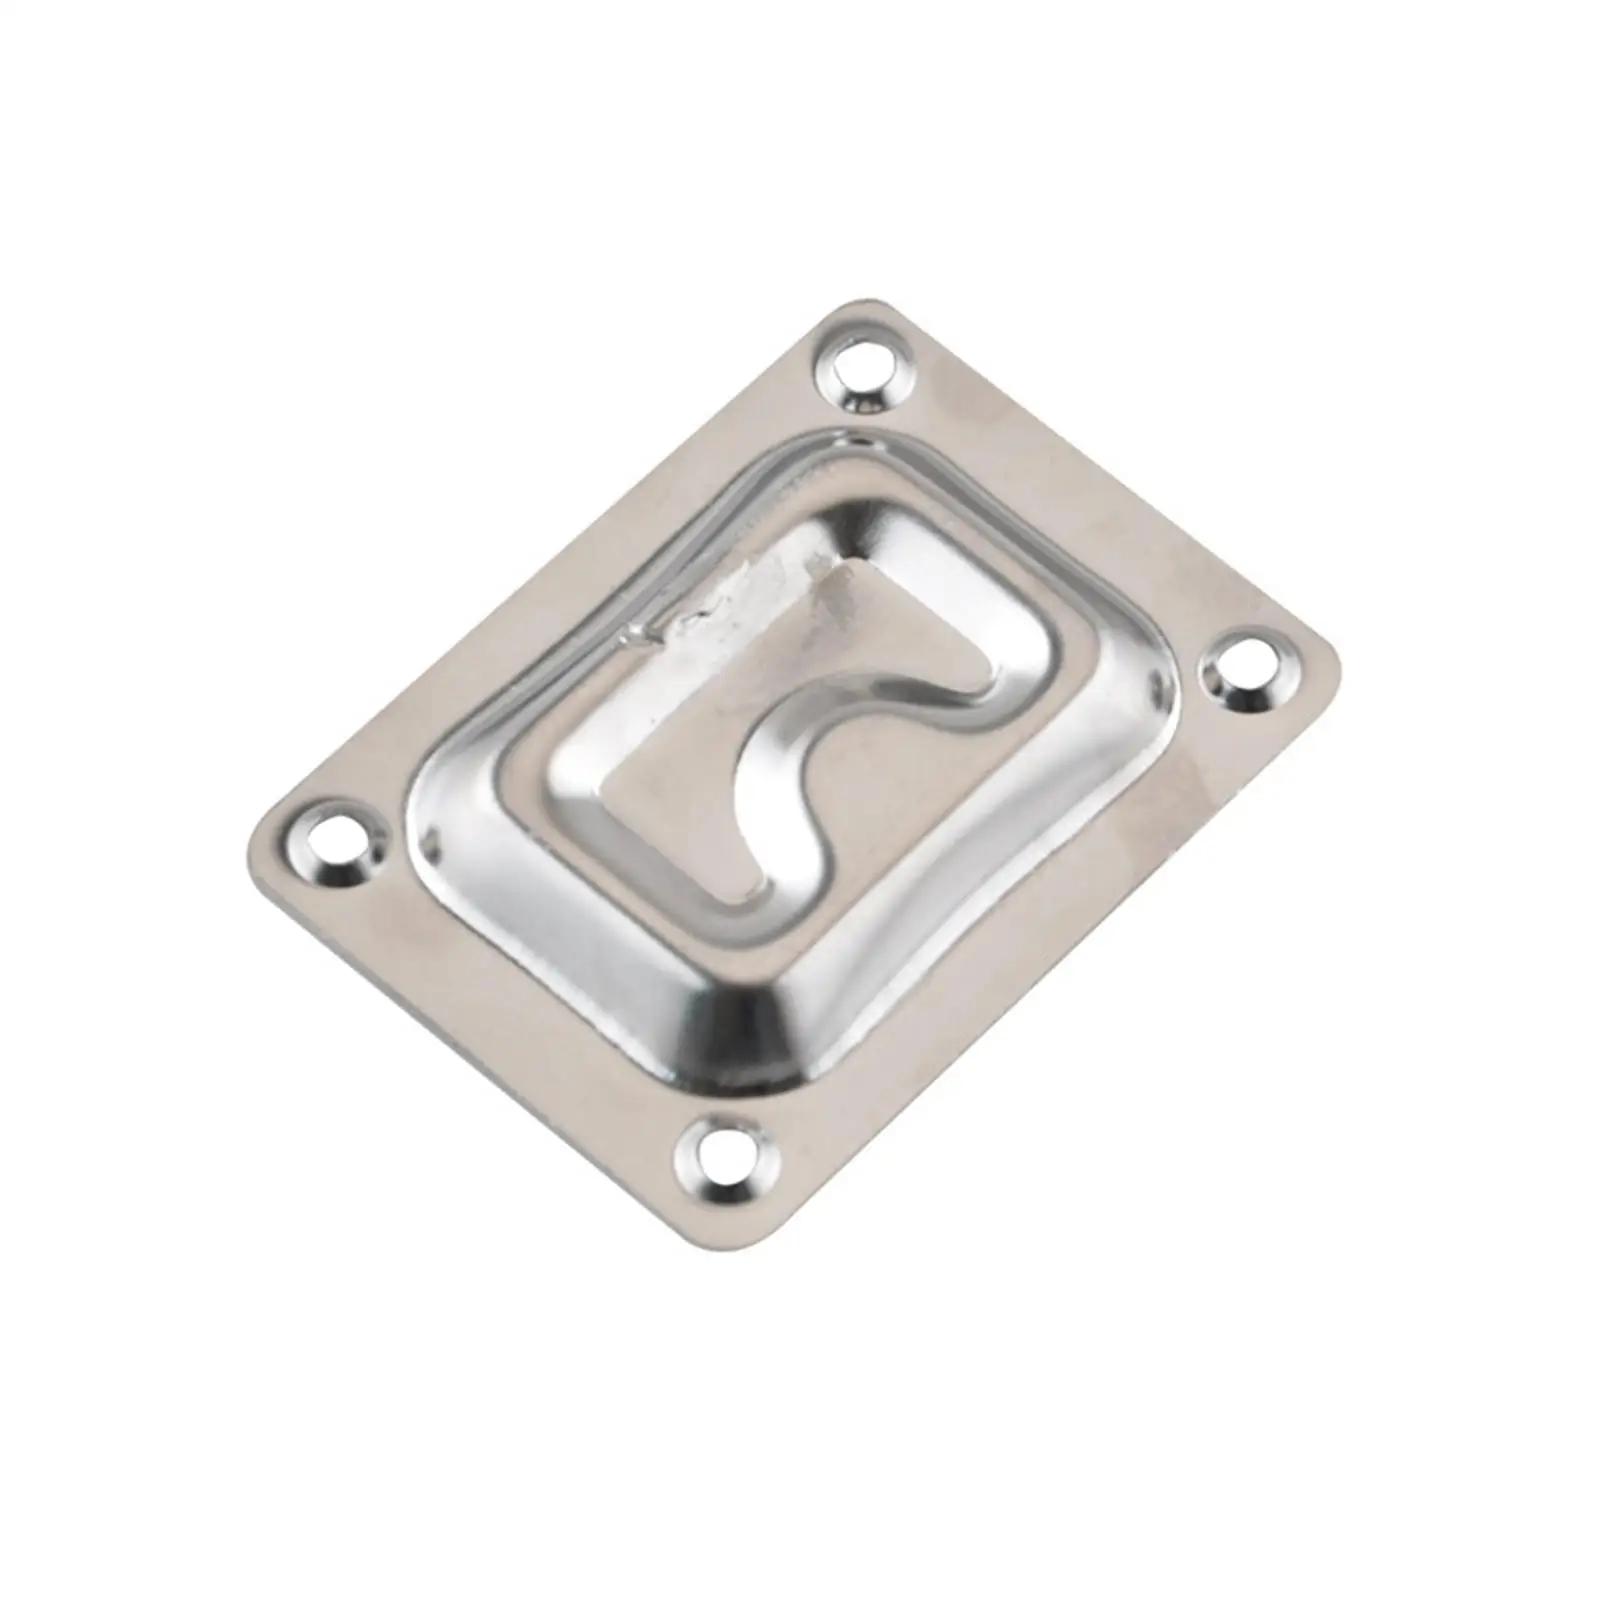 Stainless Steel Hatch Pull Flush Lift Boat Ring Spare Parts Replaces Assembly Hatch Pull Buckle Easy to Install Boat Accessories